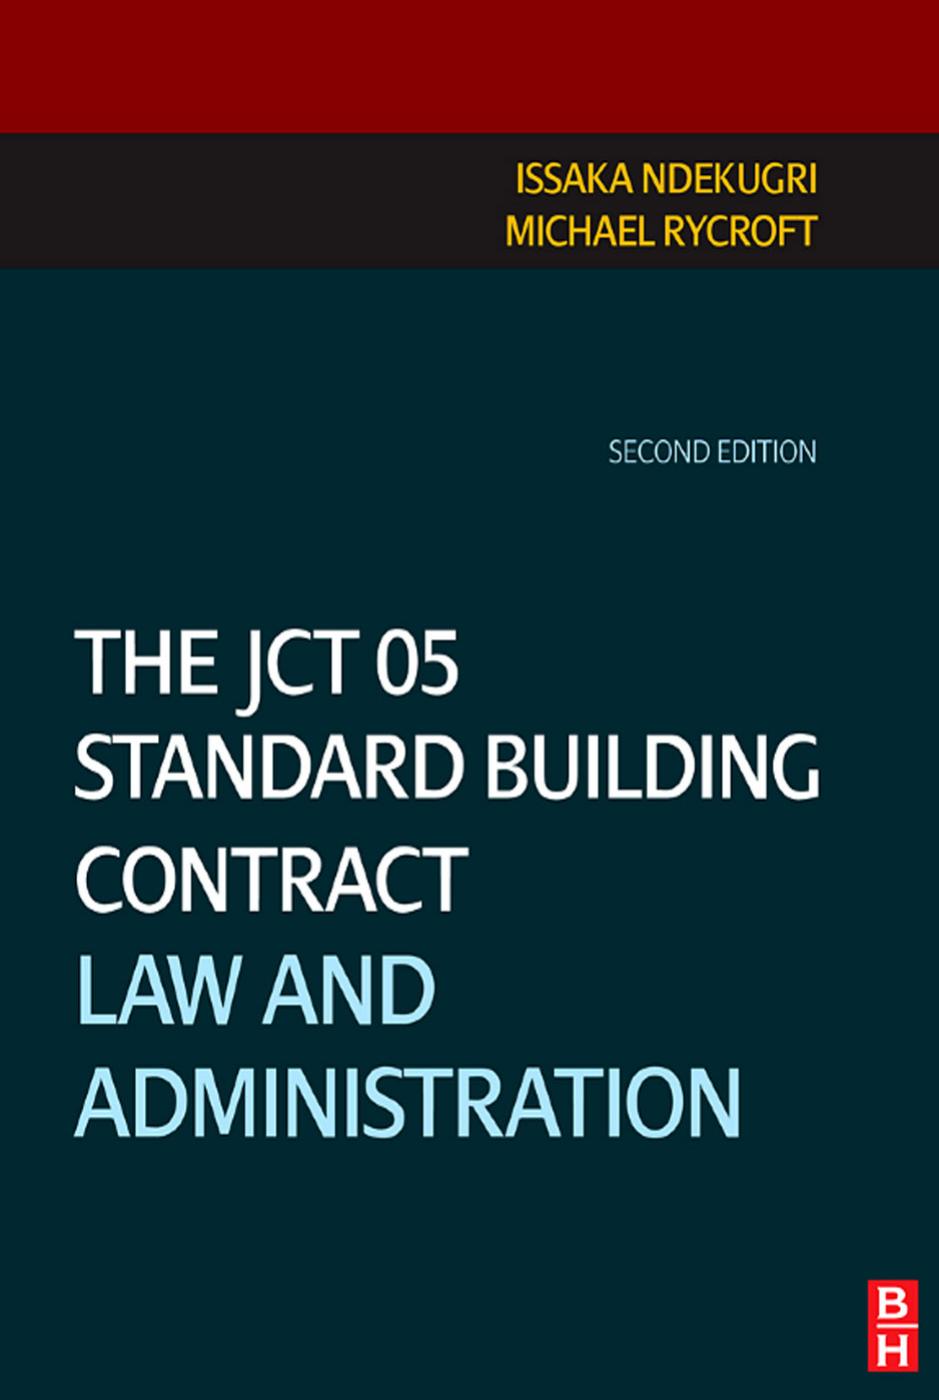 The JCT 05 Standard Building Contract, Second Edition